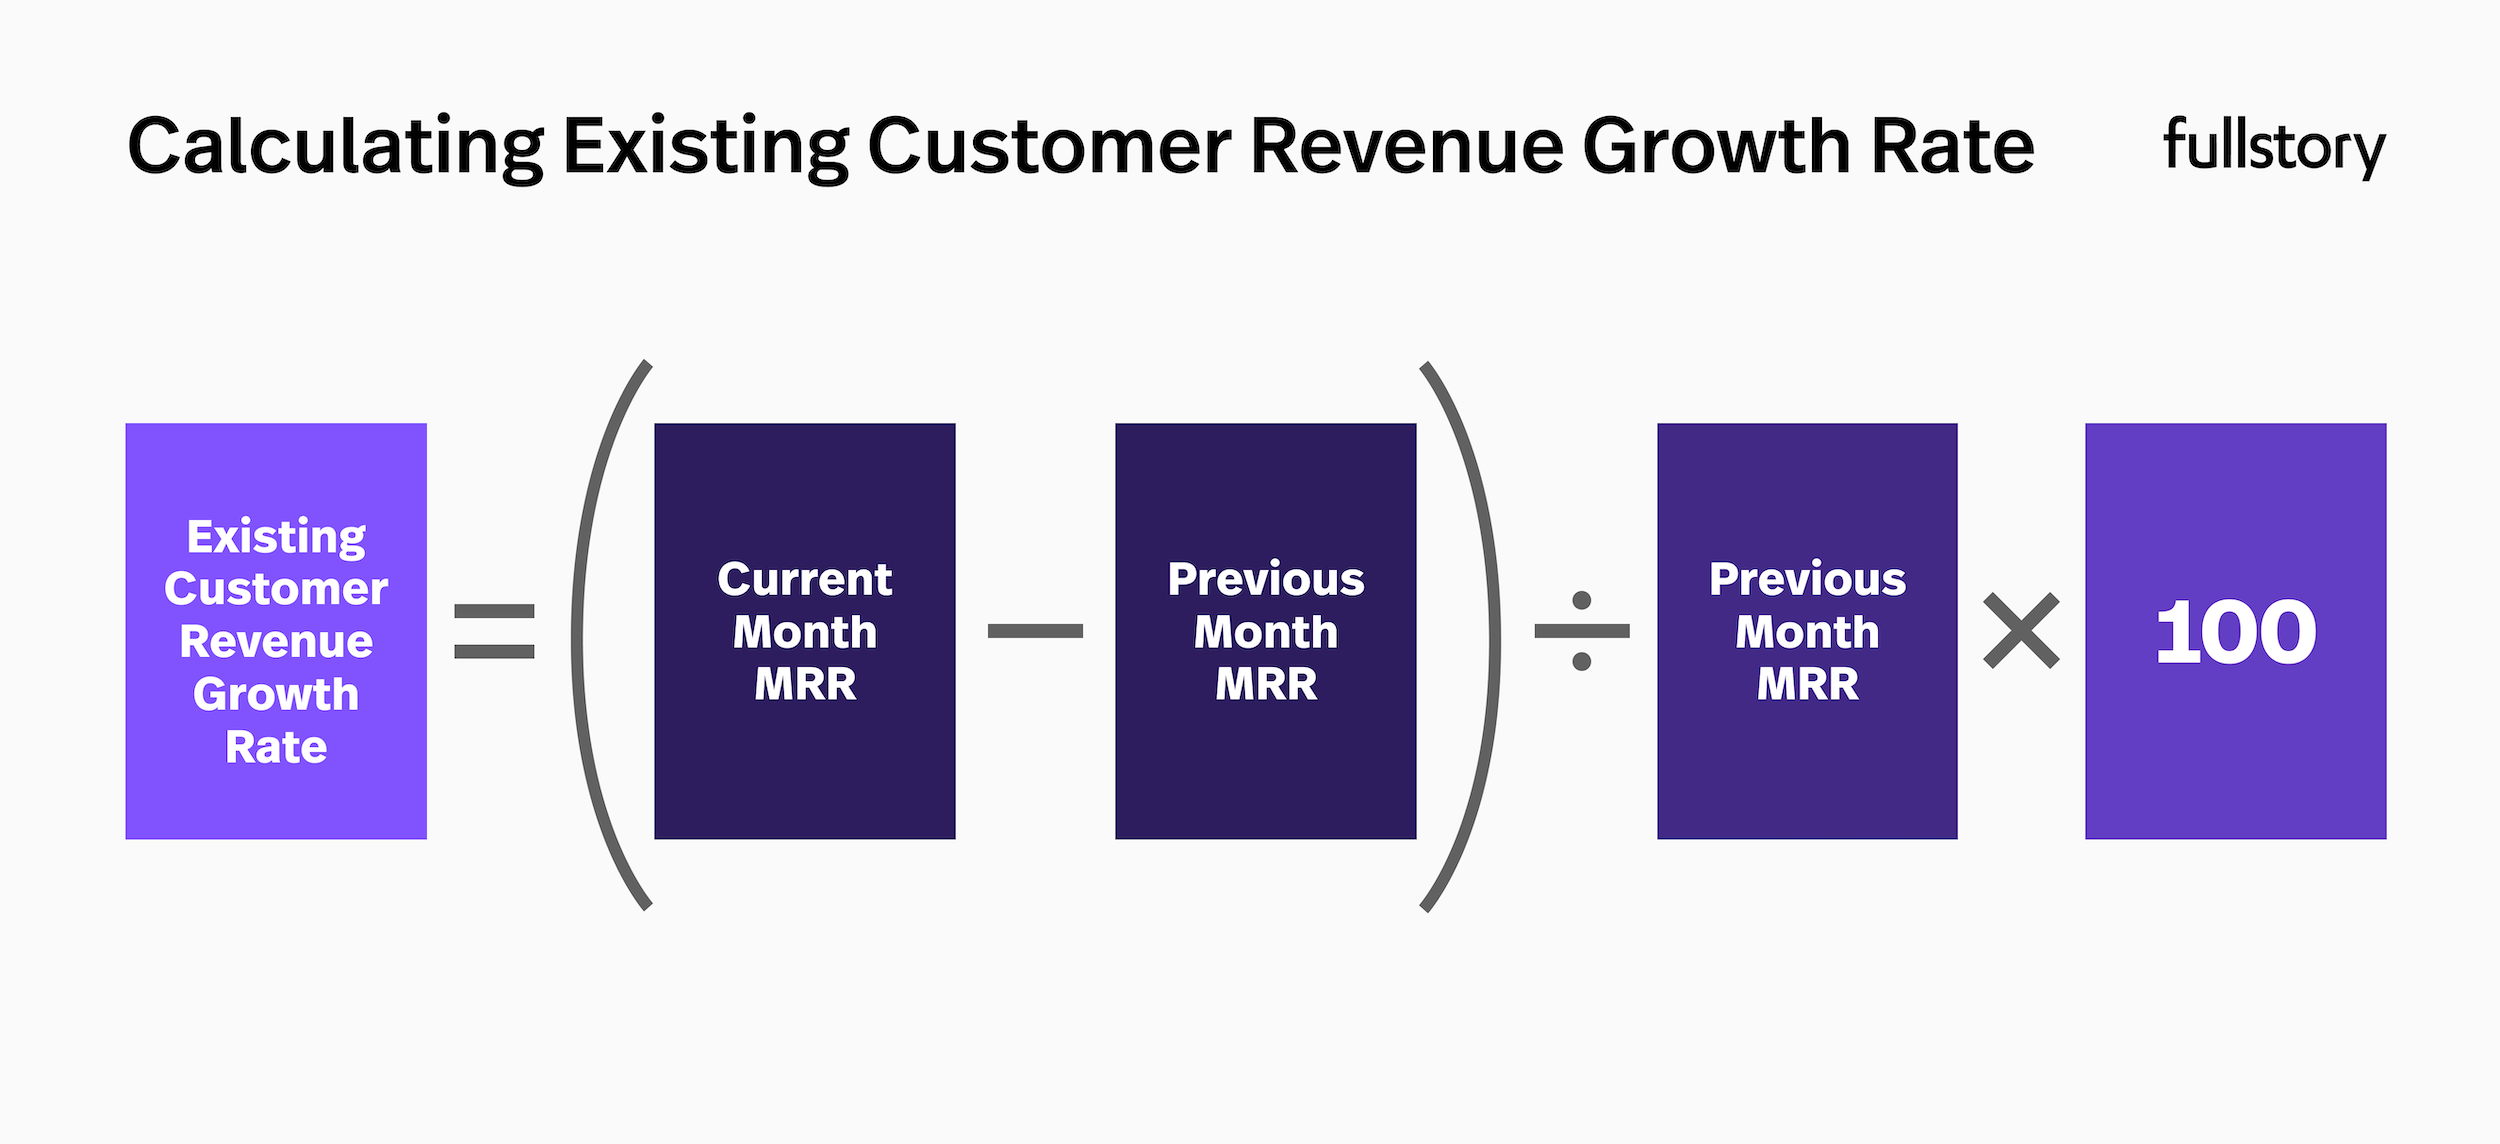 Existing customer revenue growth rate formula